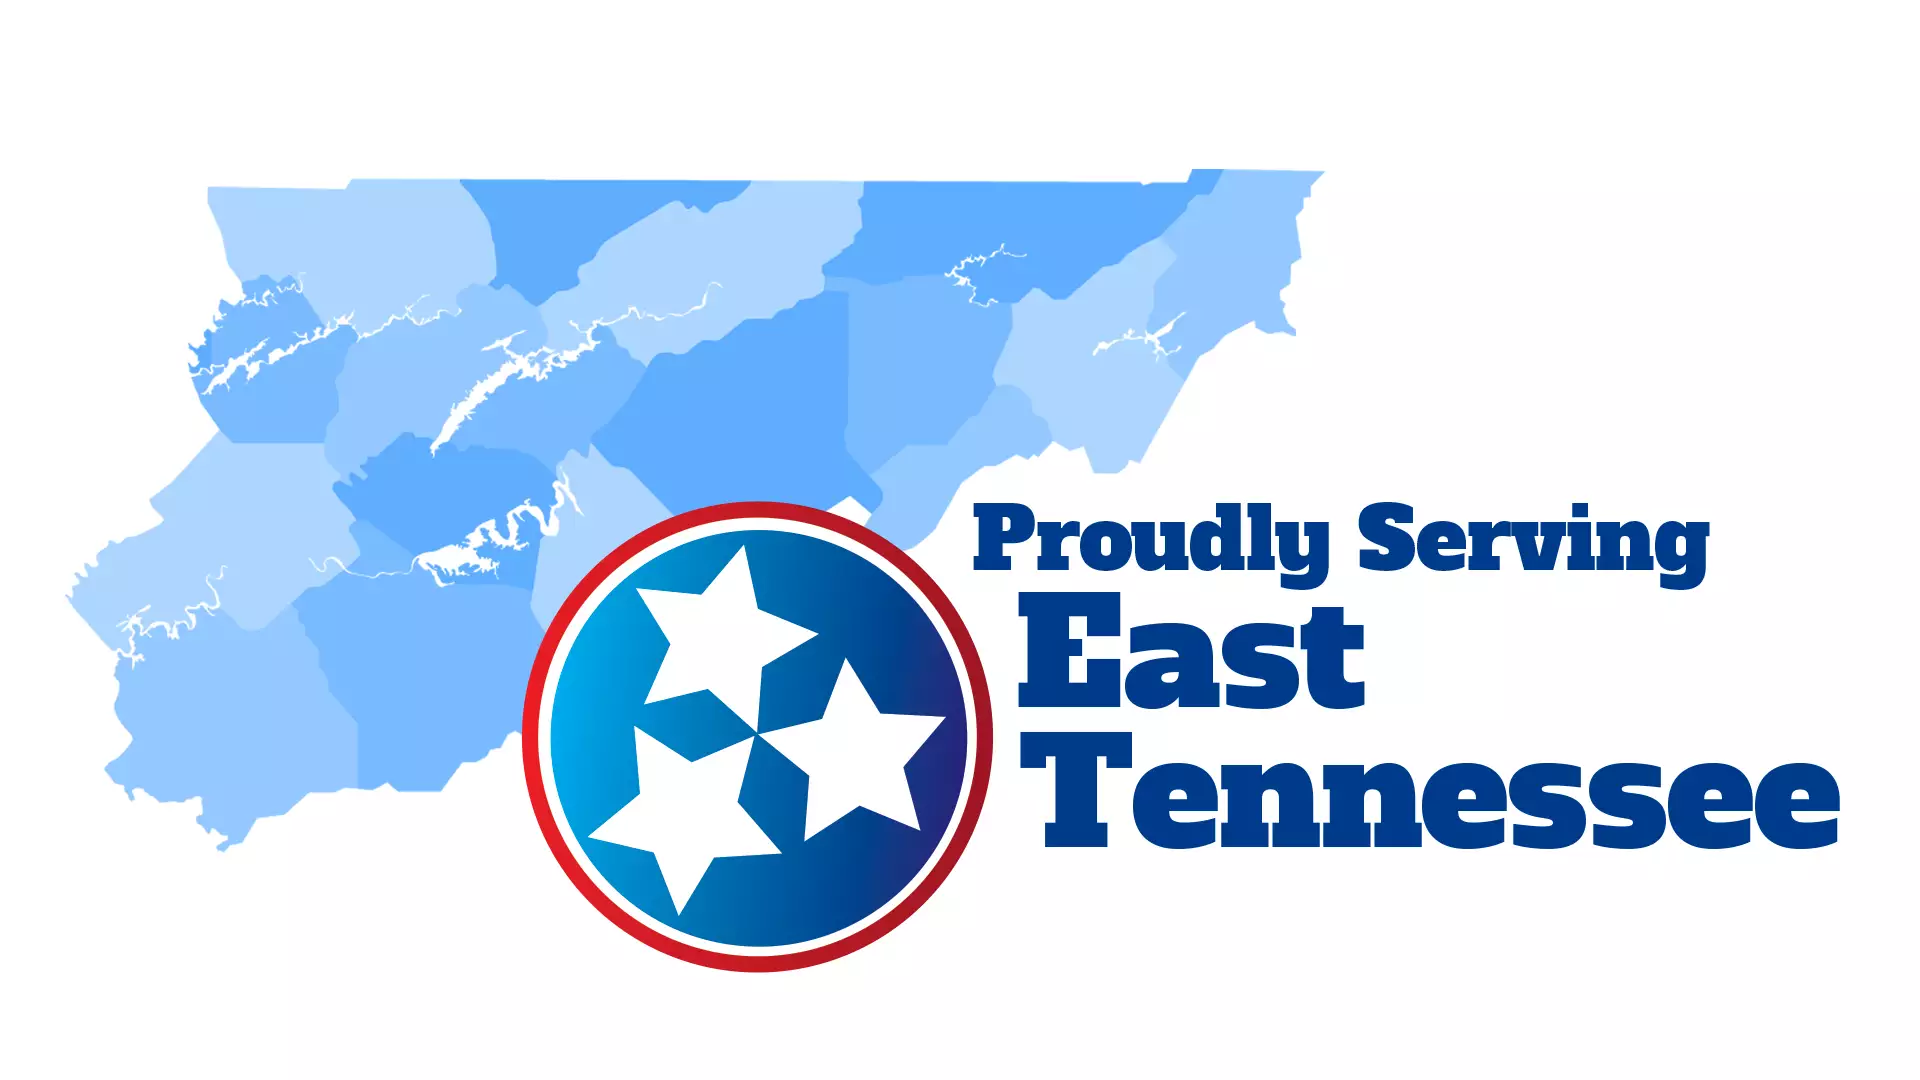 Smoky Mountain serves 13 East Tennessee counties